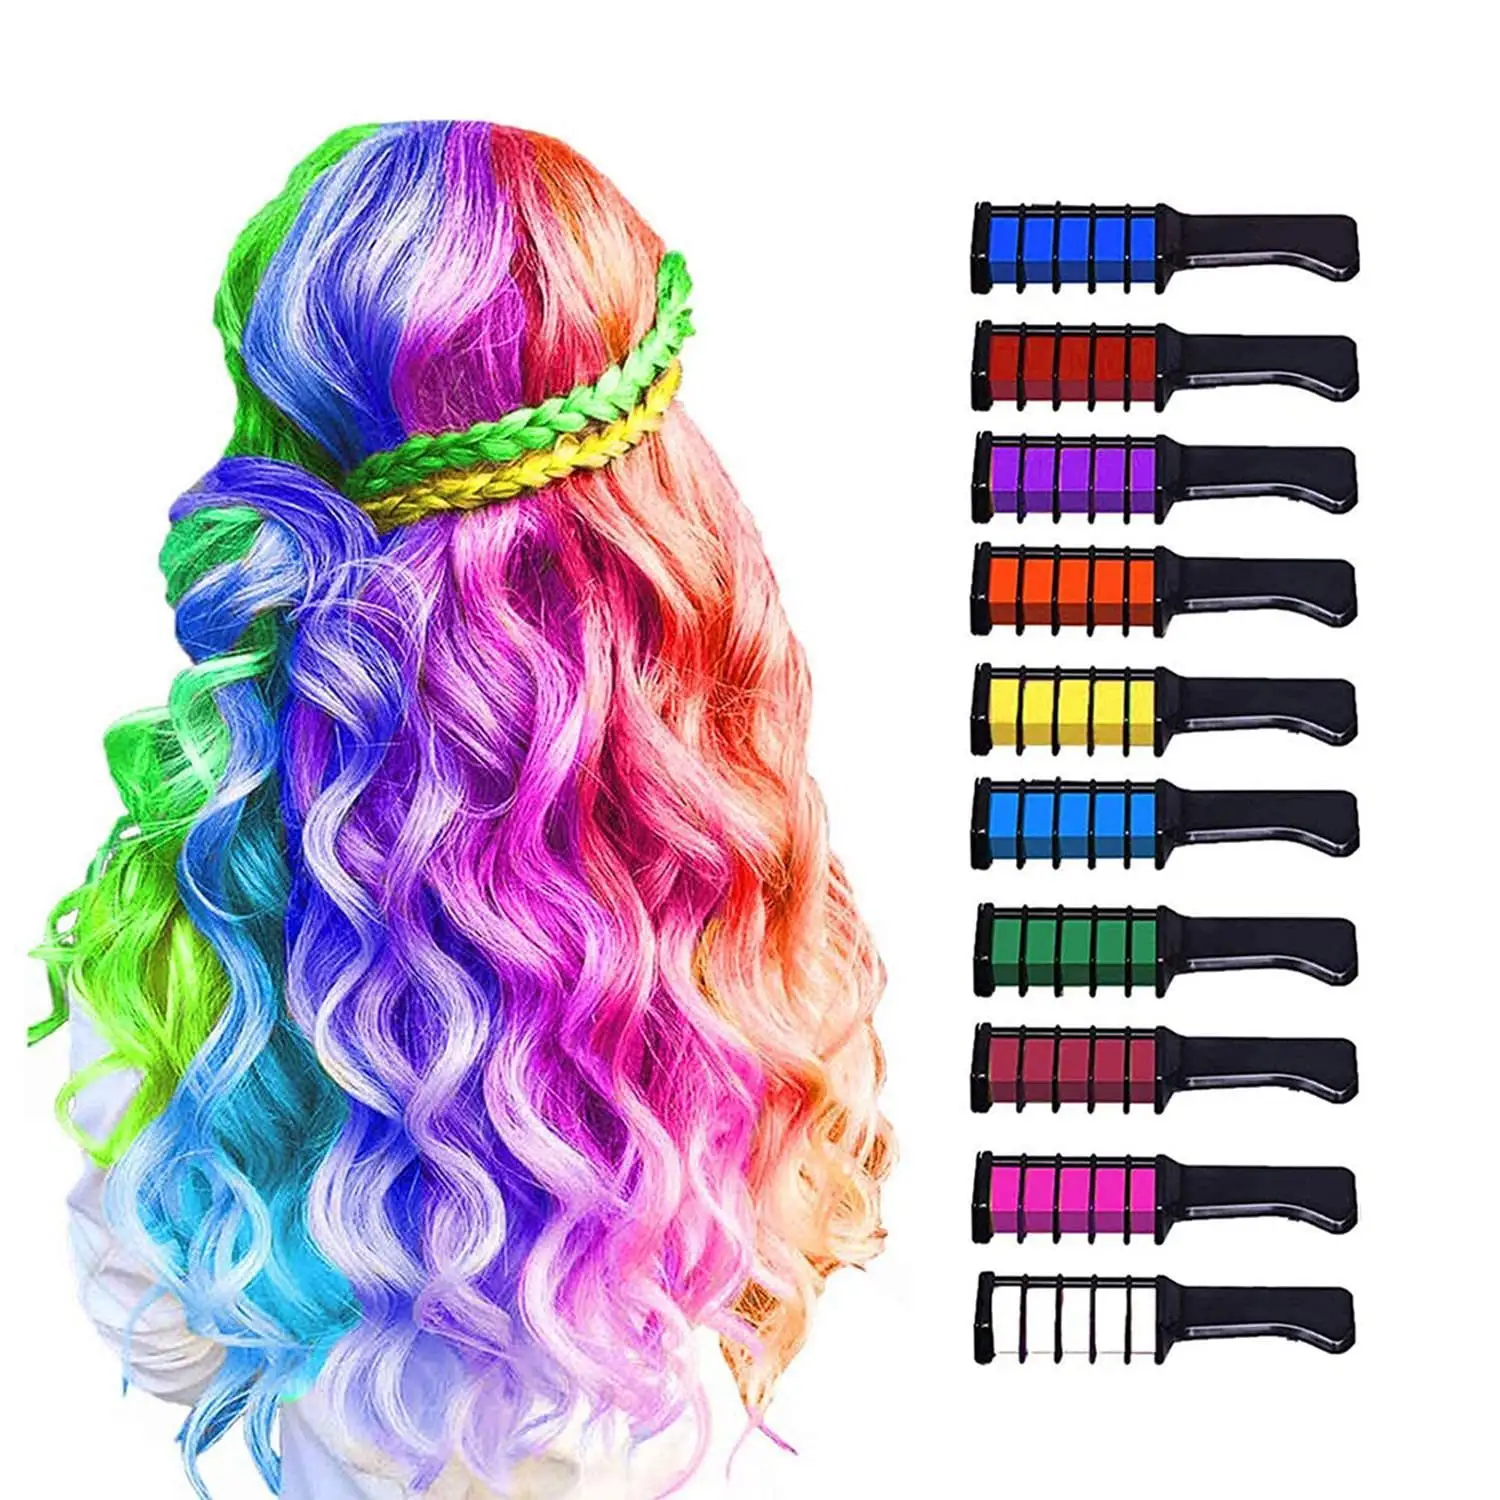 Hot sale New Arrive Chalk Comb Temporary Hair Color Dye for Girls Kids, Washable Hair Chalk for Girls Age 4 5 6 7 8 9 10